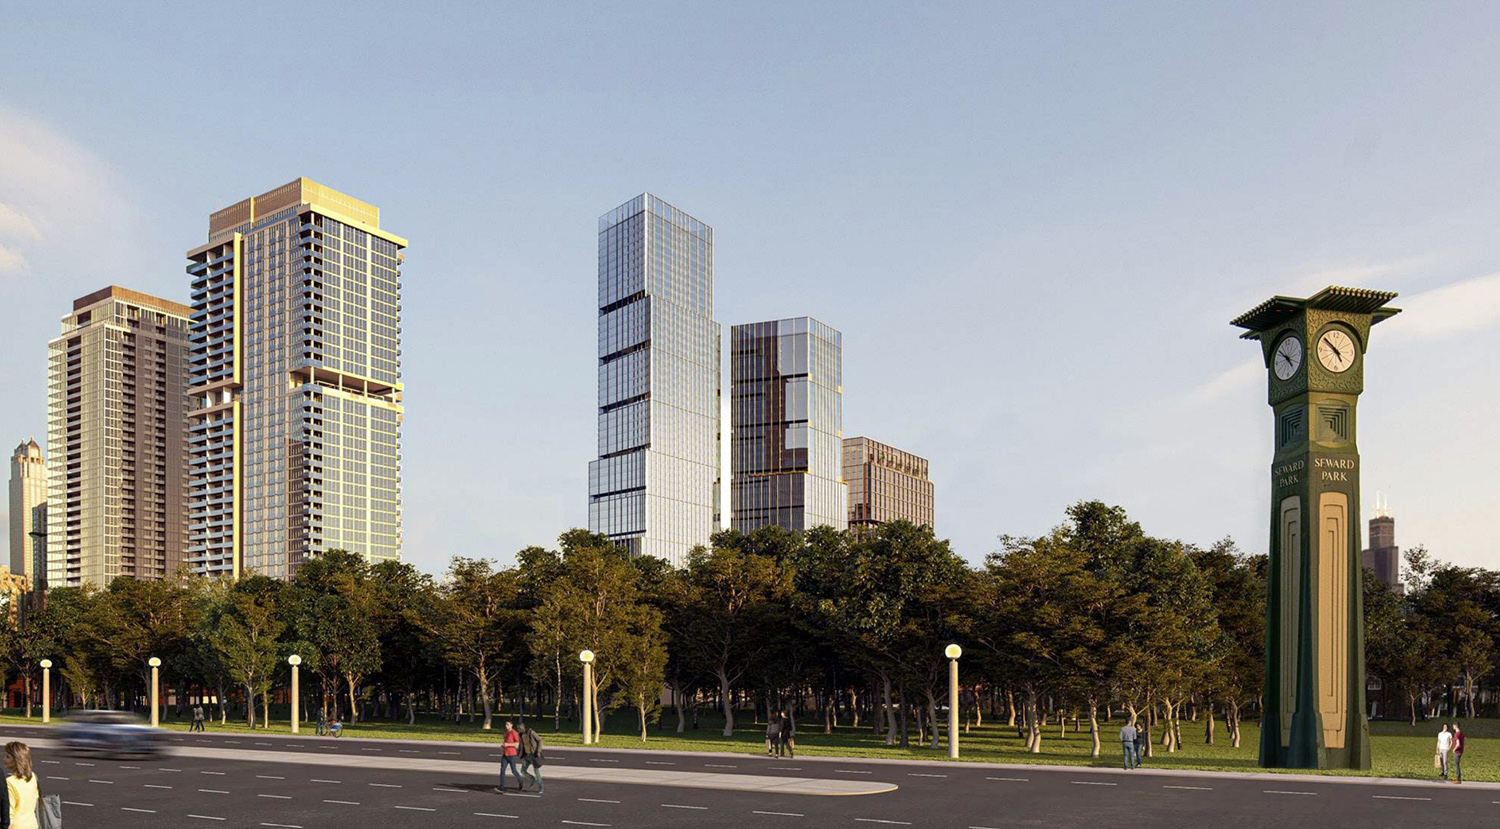 View of 300 W Oak Street and 310 W Oak Street in Phase 5 for North Union. Rendering by Hartshorne Plunkard Architecture